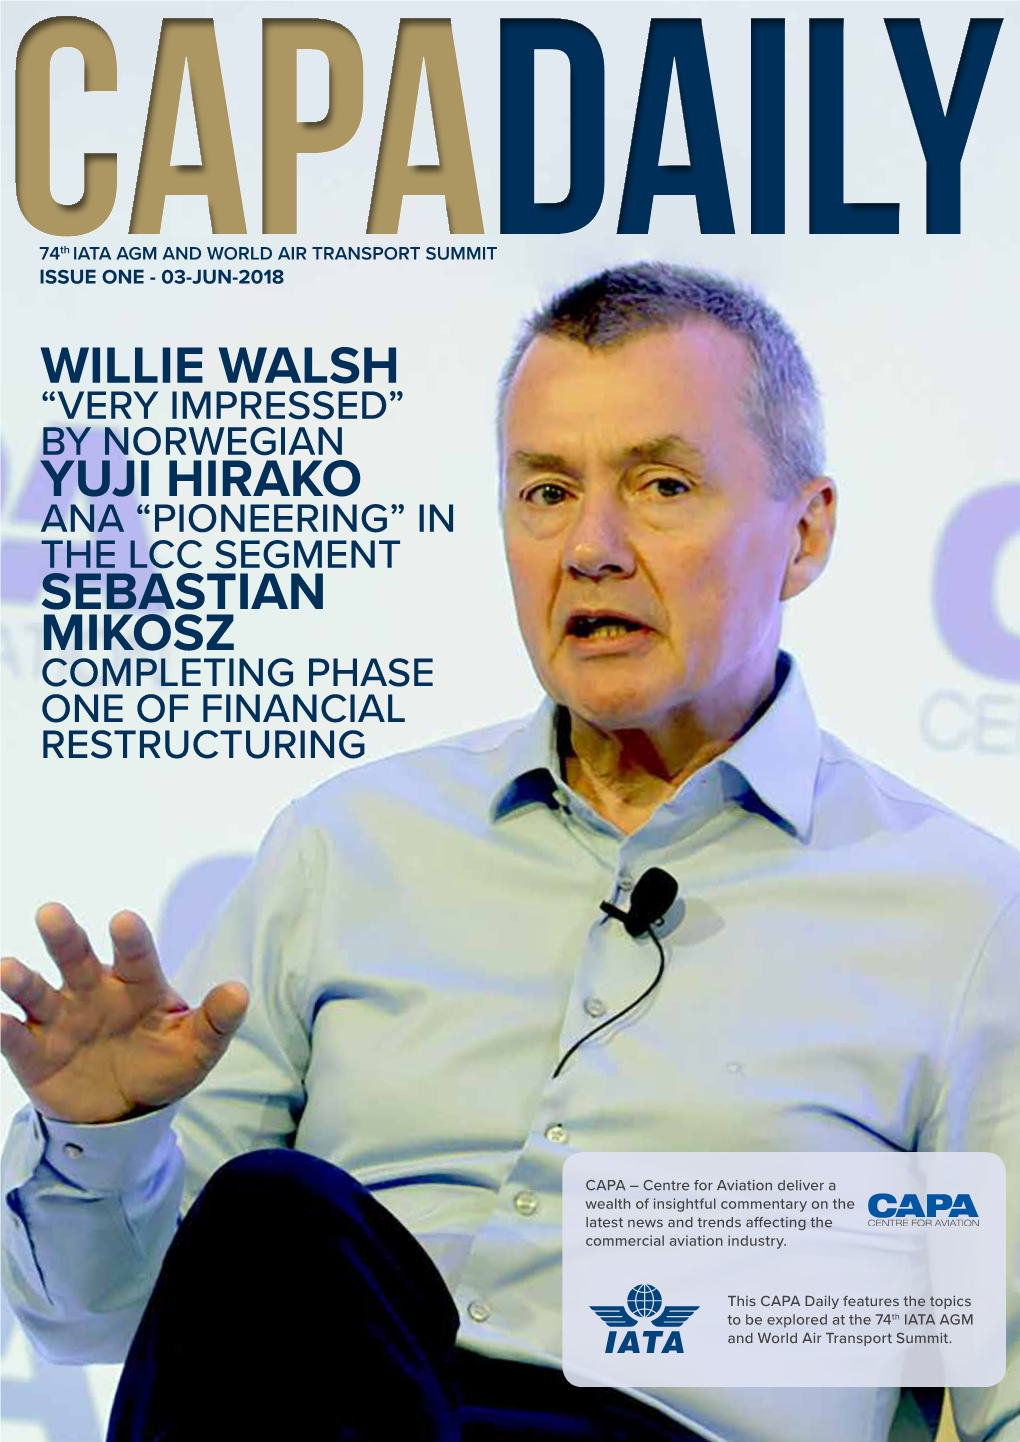 Willie Walsh “Very Impressed” by Norwegian Yuji Hirako Ana “Pioneering” in the Lcc Segment Sebastian Mikosz Completing Phase One of Financial Restructuring